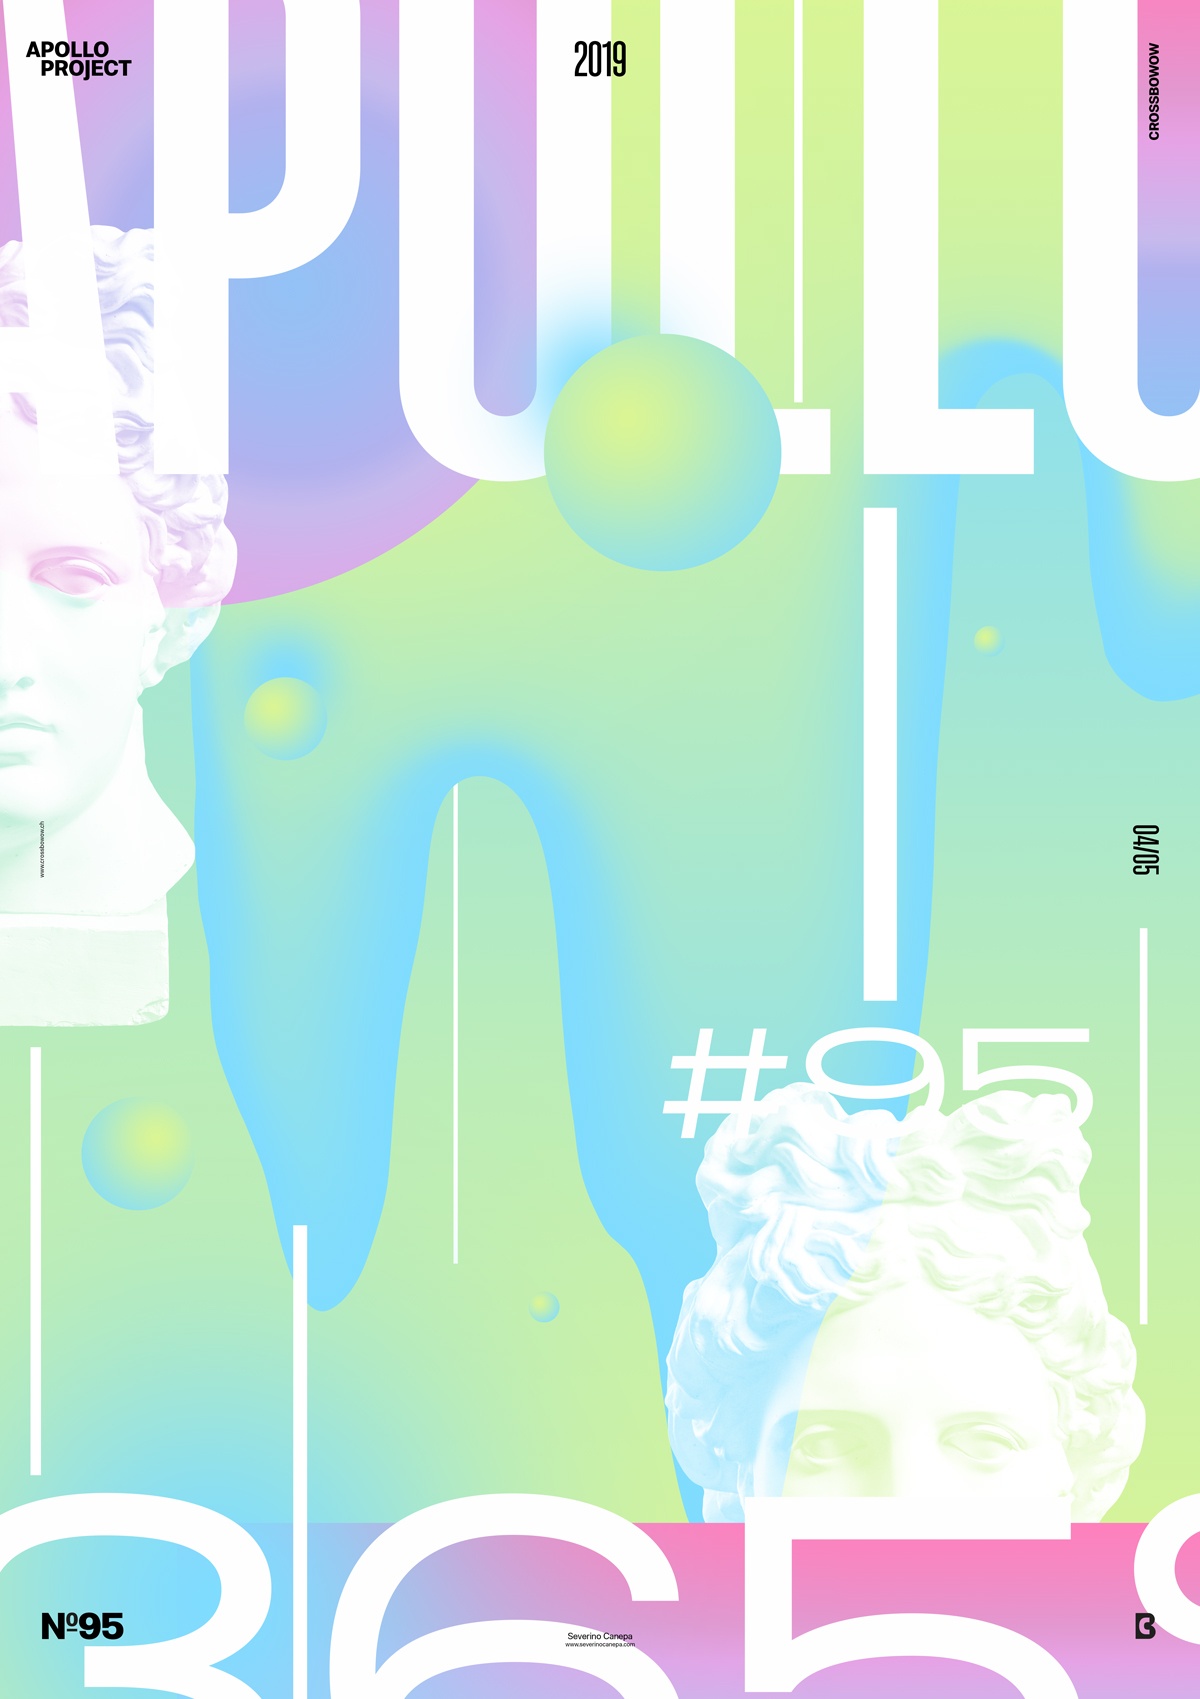 The poster design #95 Green Paradise with apollo's head and gradient colors